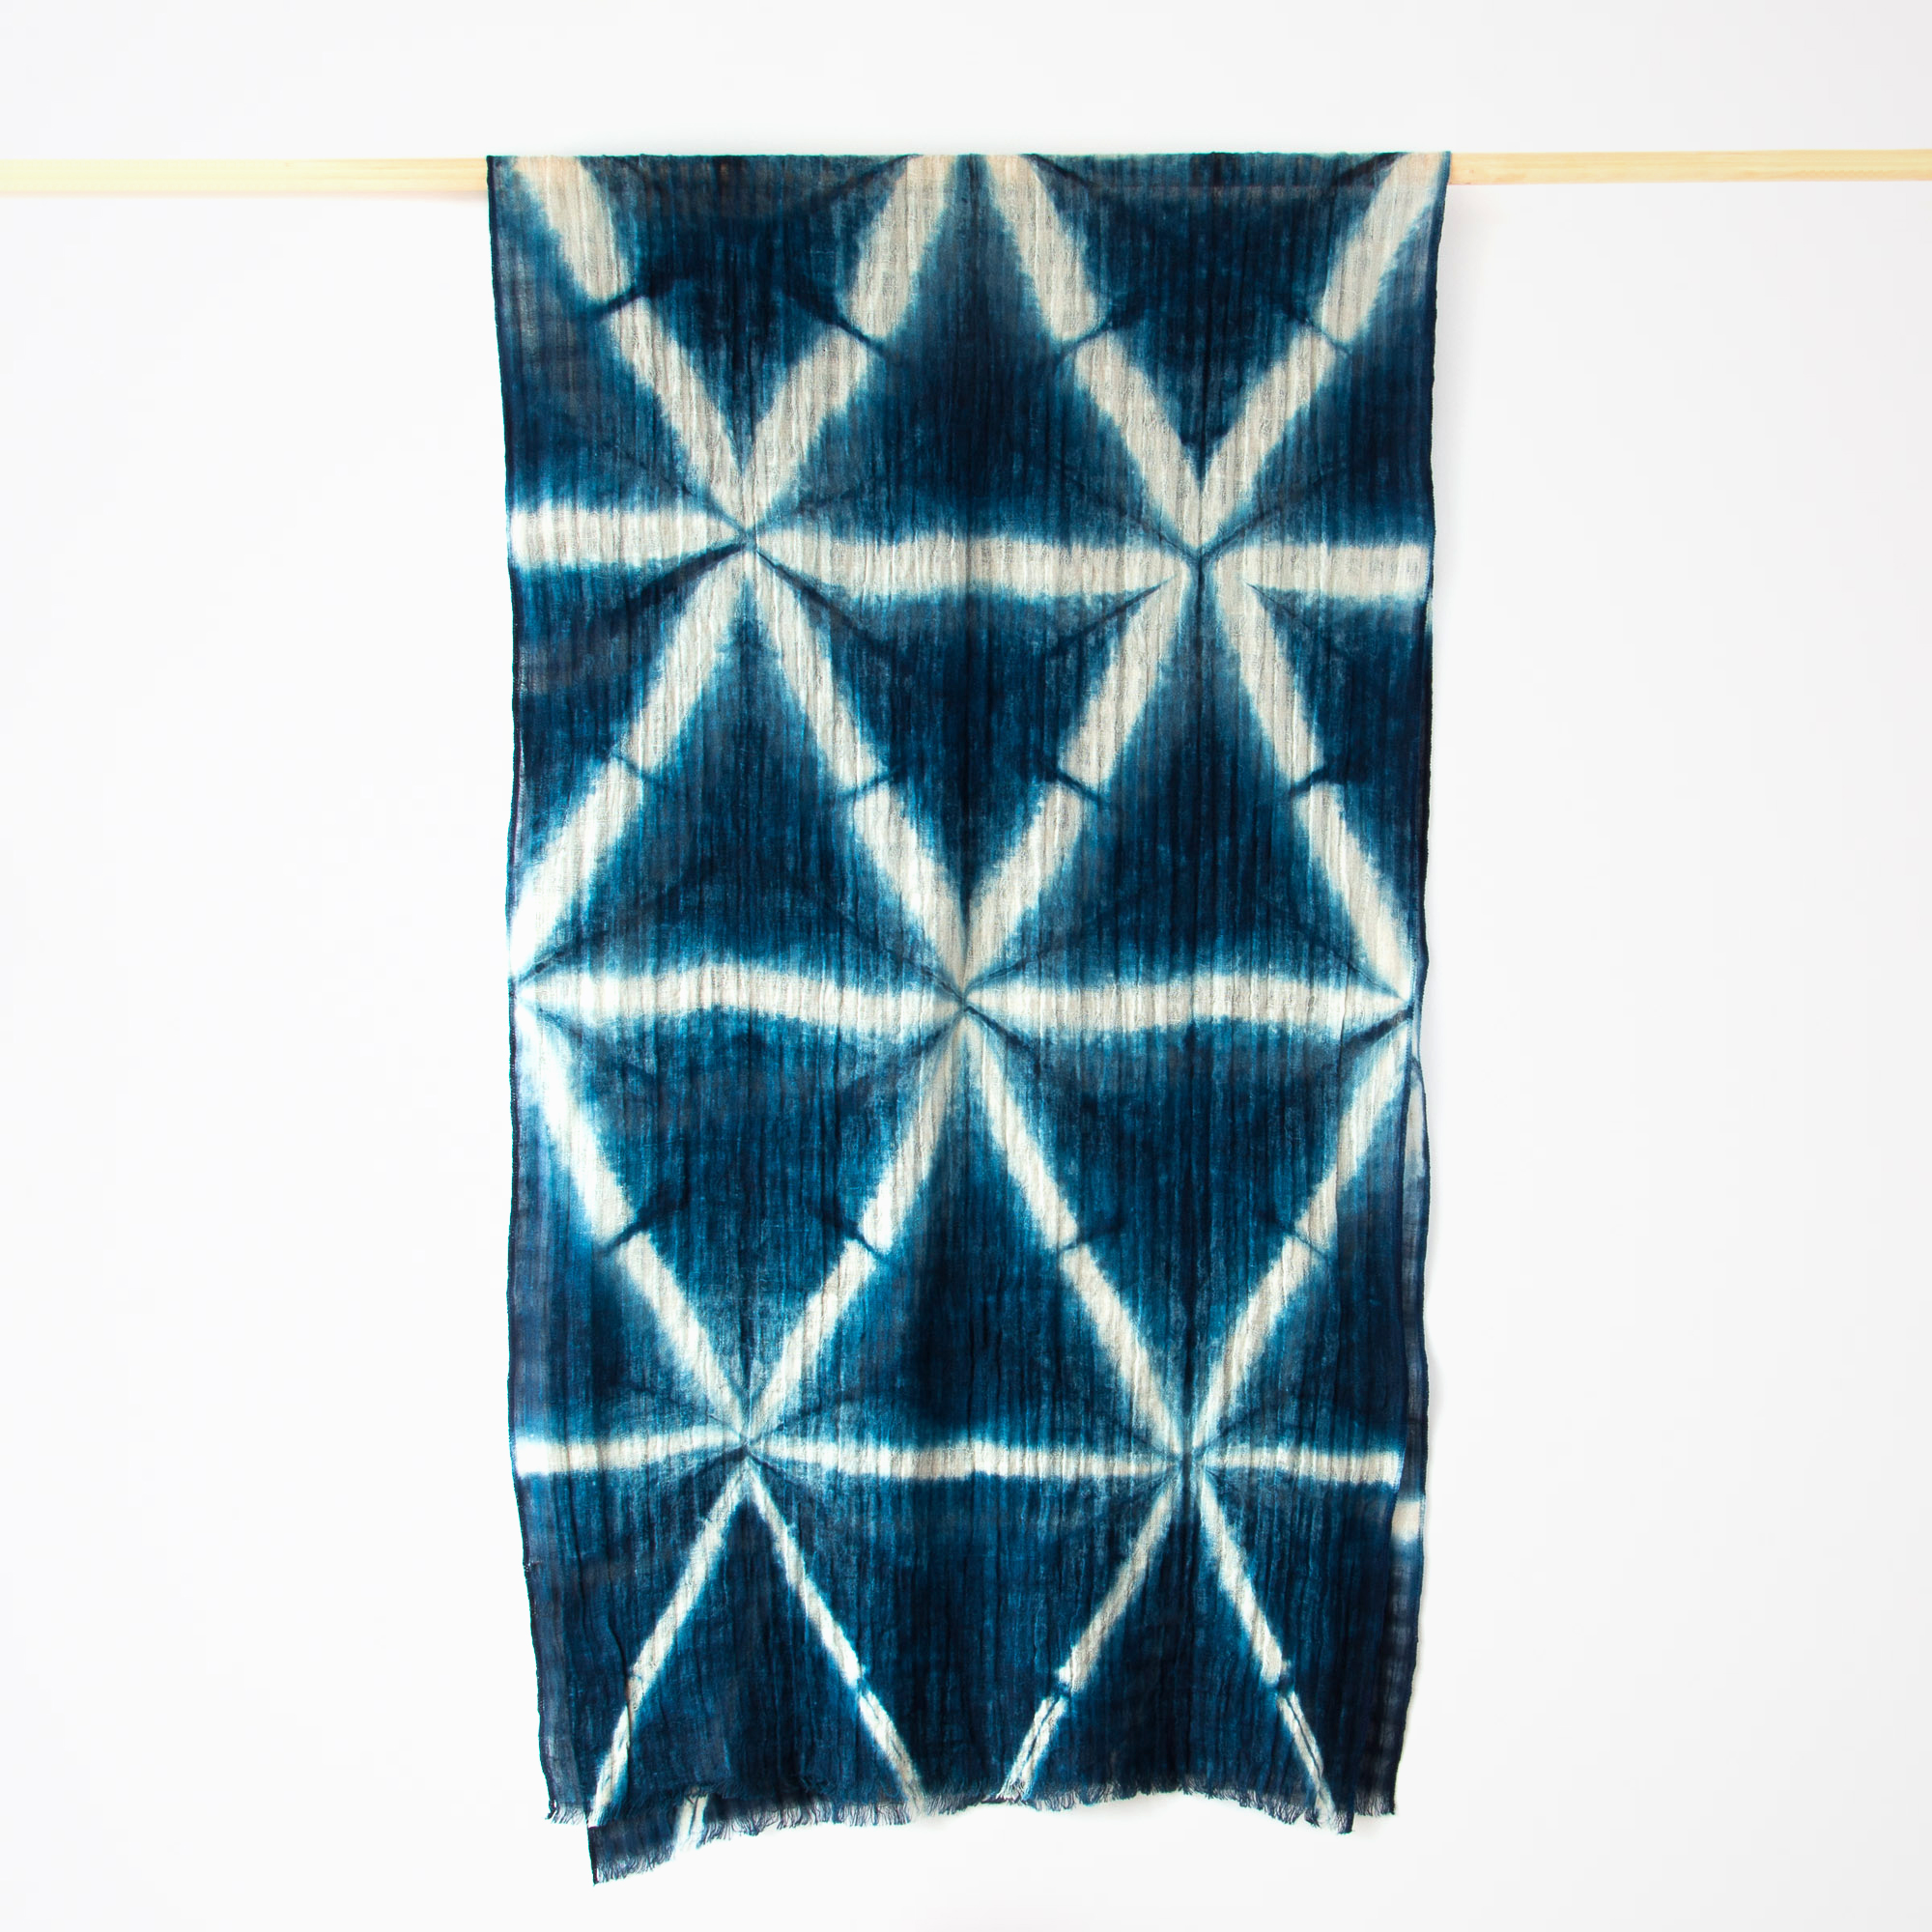 Infuse Textile - High-end Scarves & Cushions on Behance